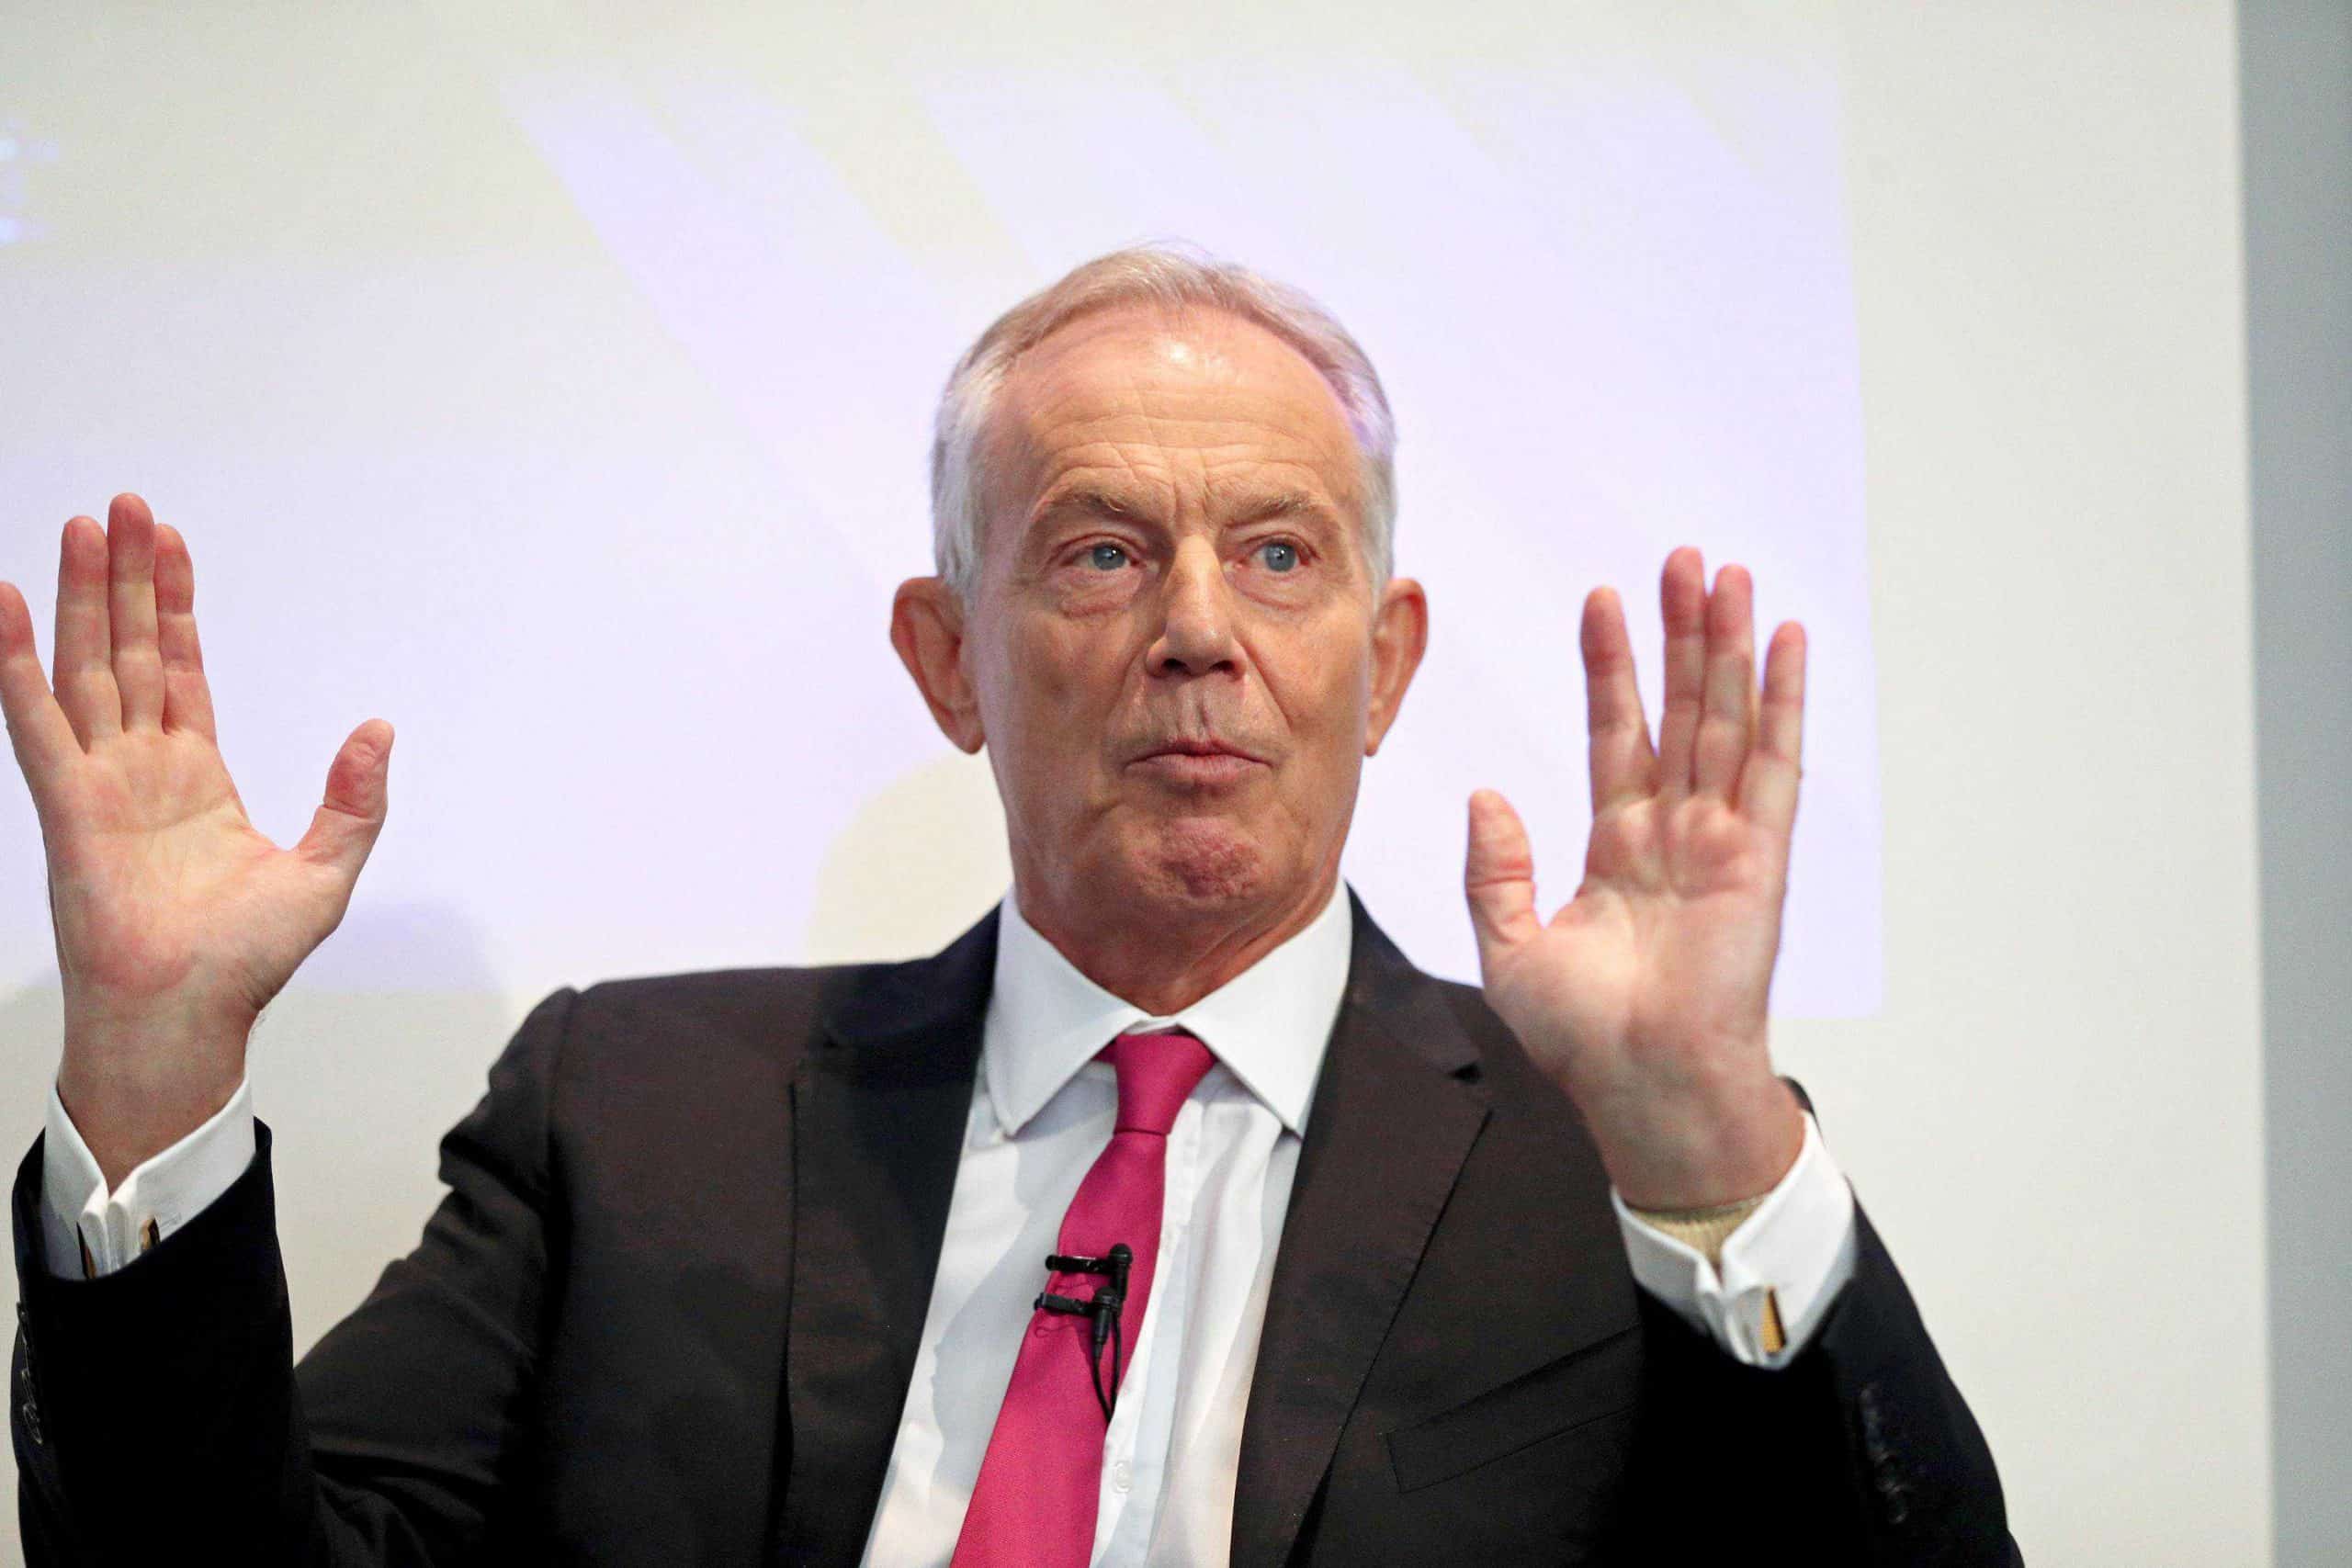 Ex-Labour leader Tony Blair urges party to avoid ‘culture war’ on trans rights